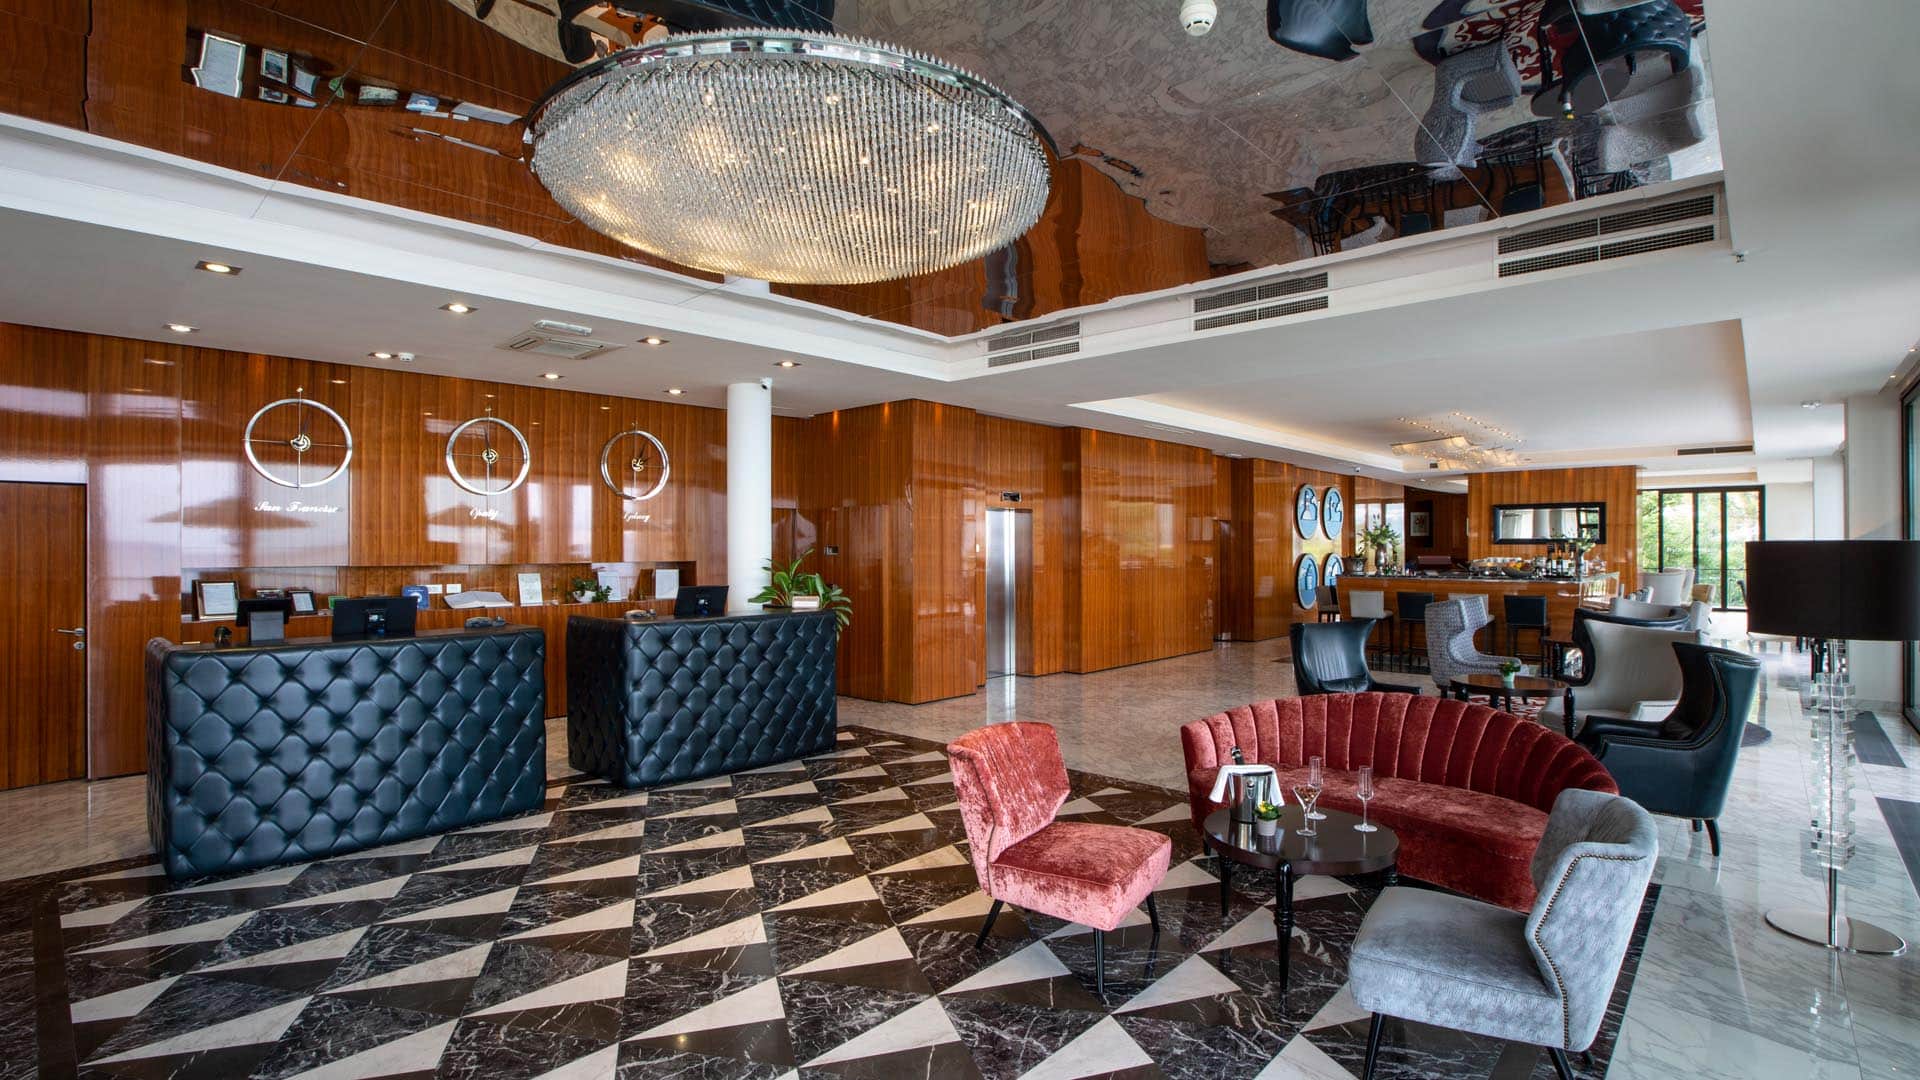 Frontlobby des Hotels Royal in Opatija